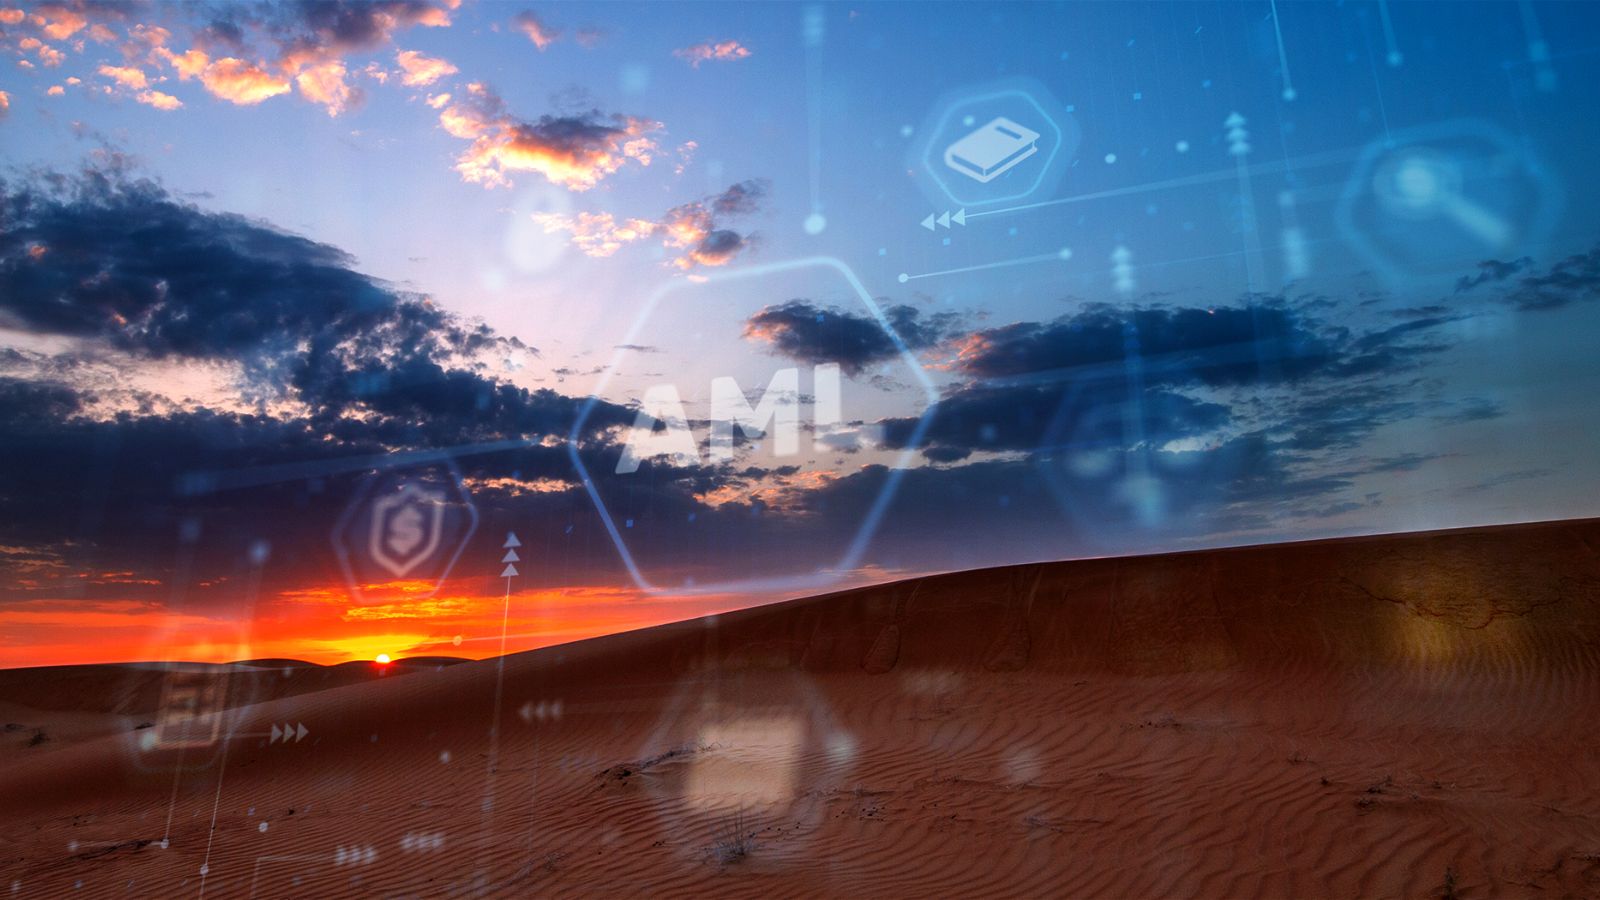 Photo montage of a desert sand dune at sunrise, over-layered with tech icons.